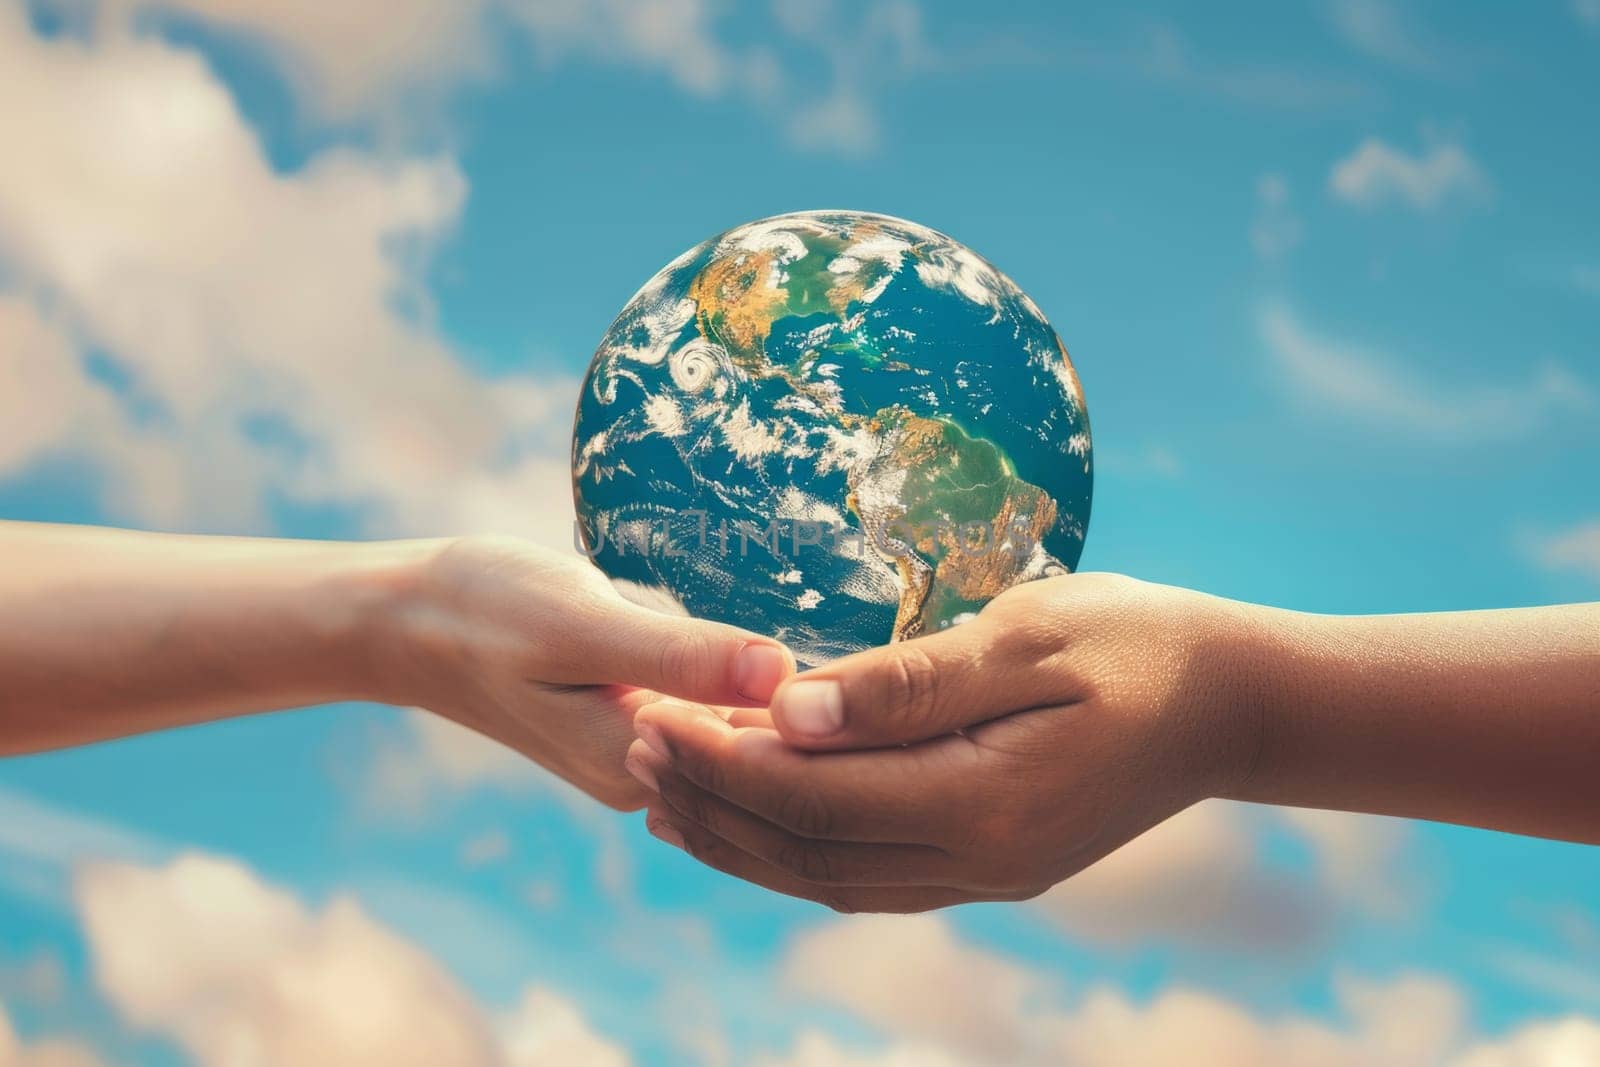 Two human hands holding Earth on a sky background. Environmental care and global unity concept by papatonic